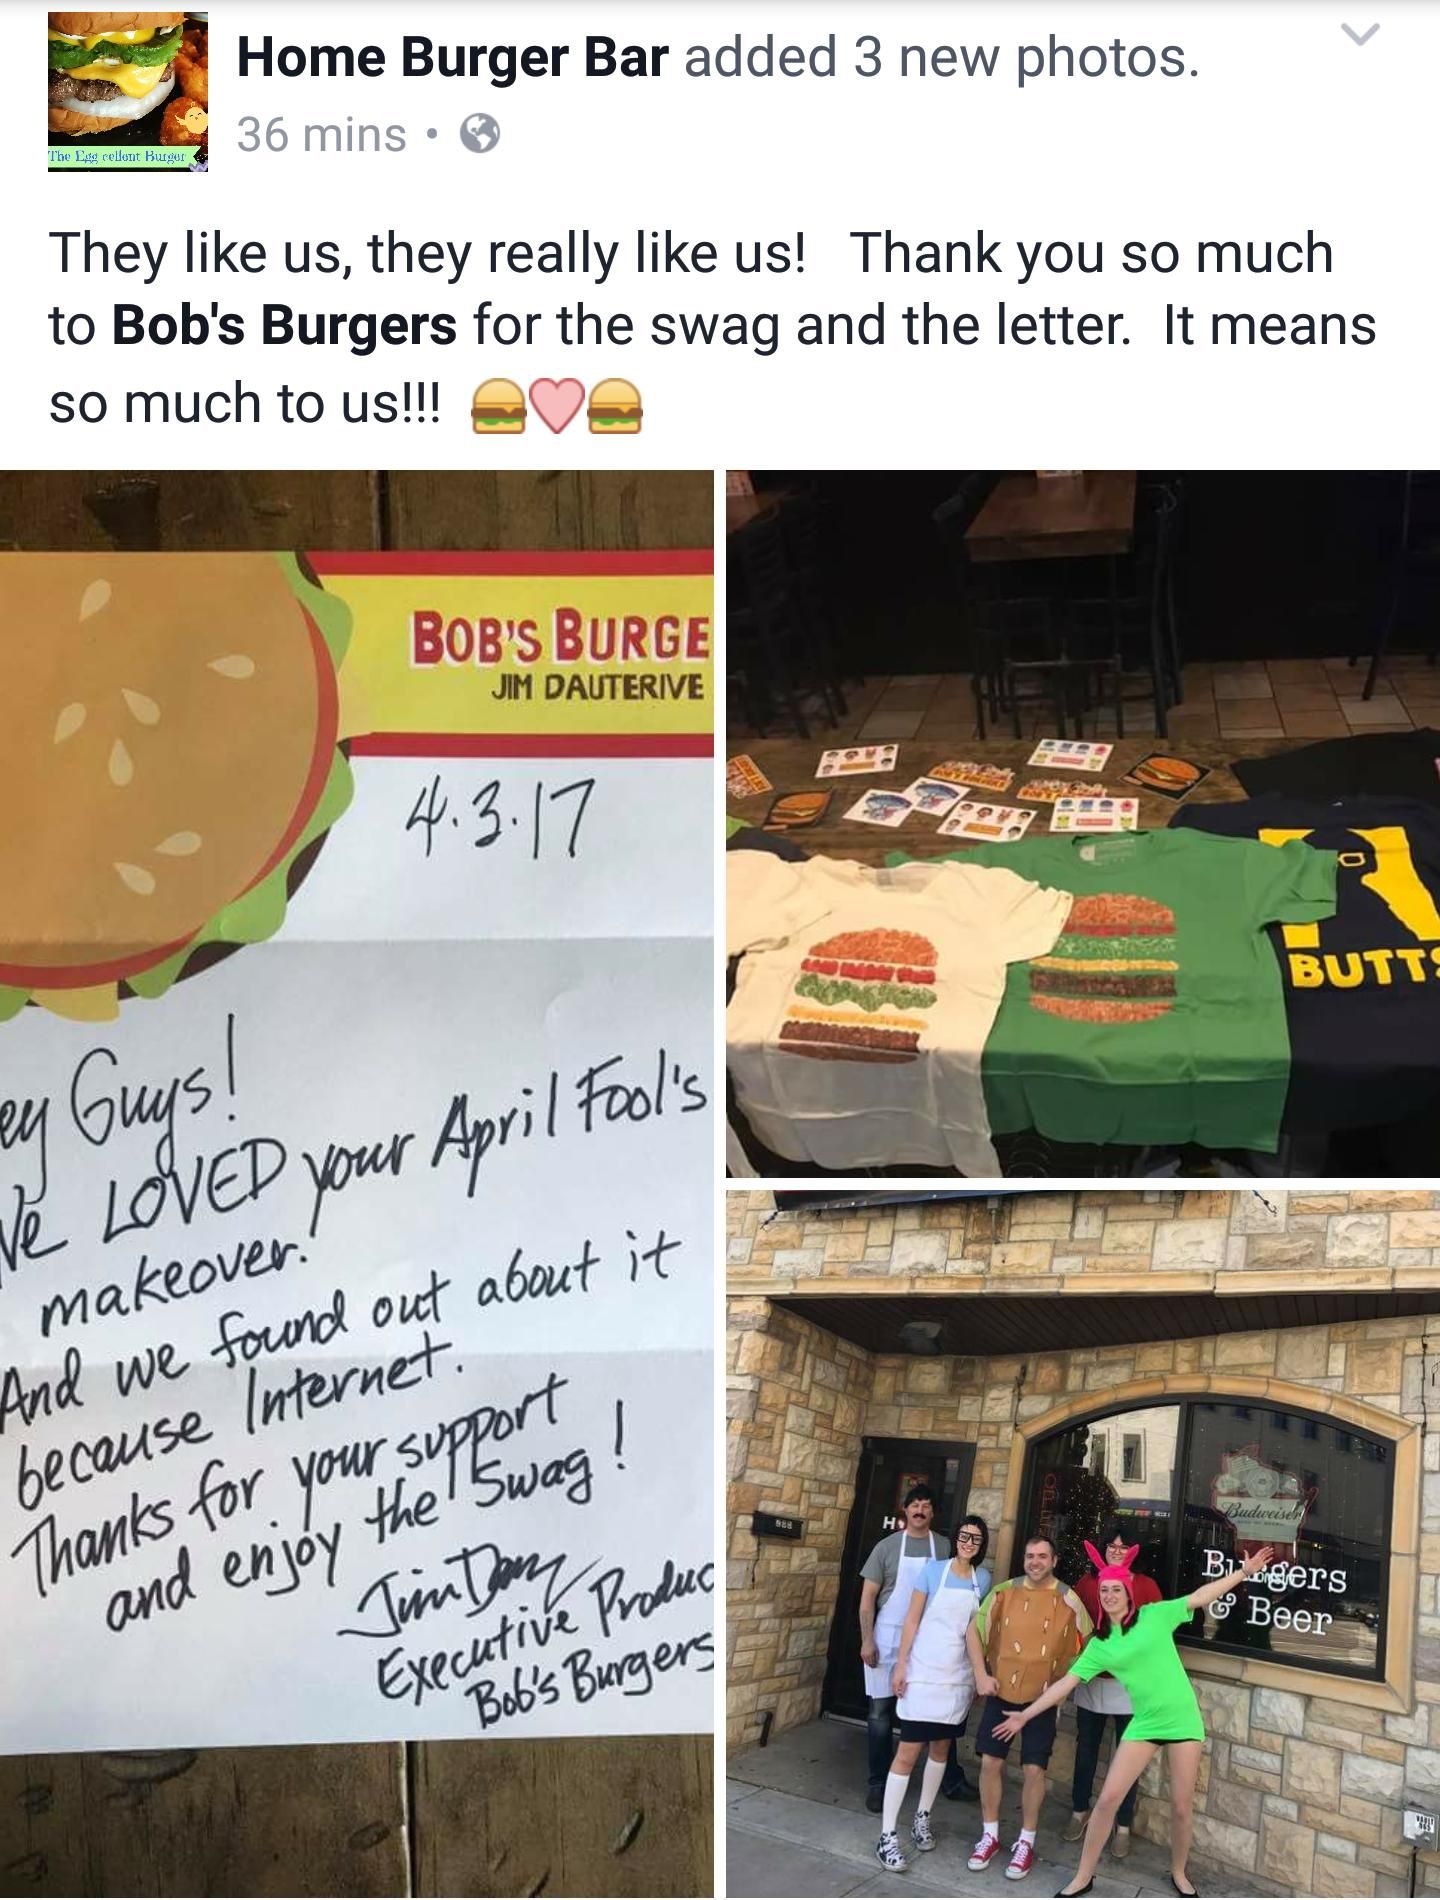 Update: Local bar that turned into Bob's Burgers got a note and swag from Jim Dauterive